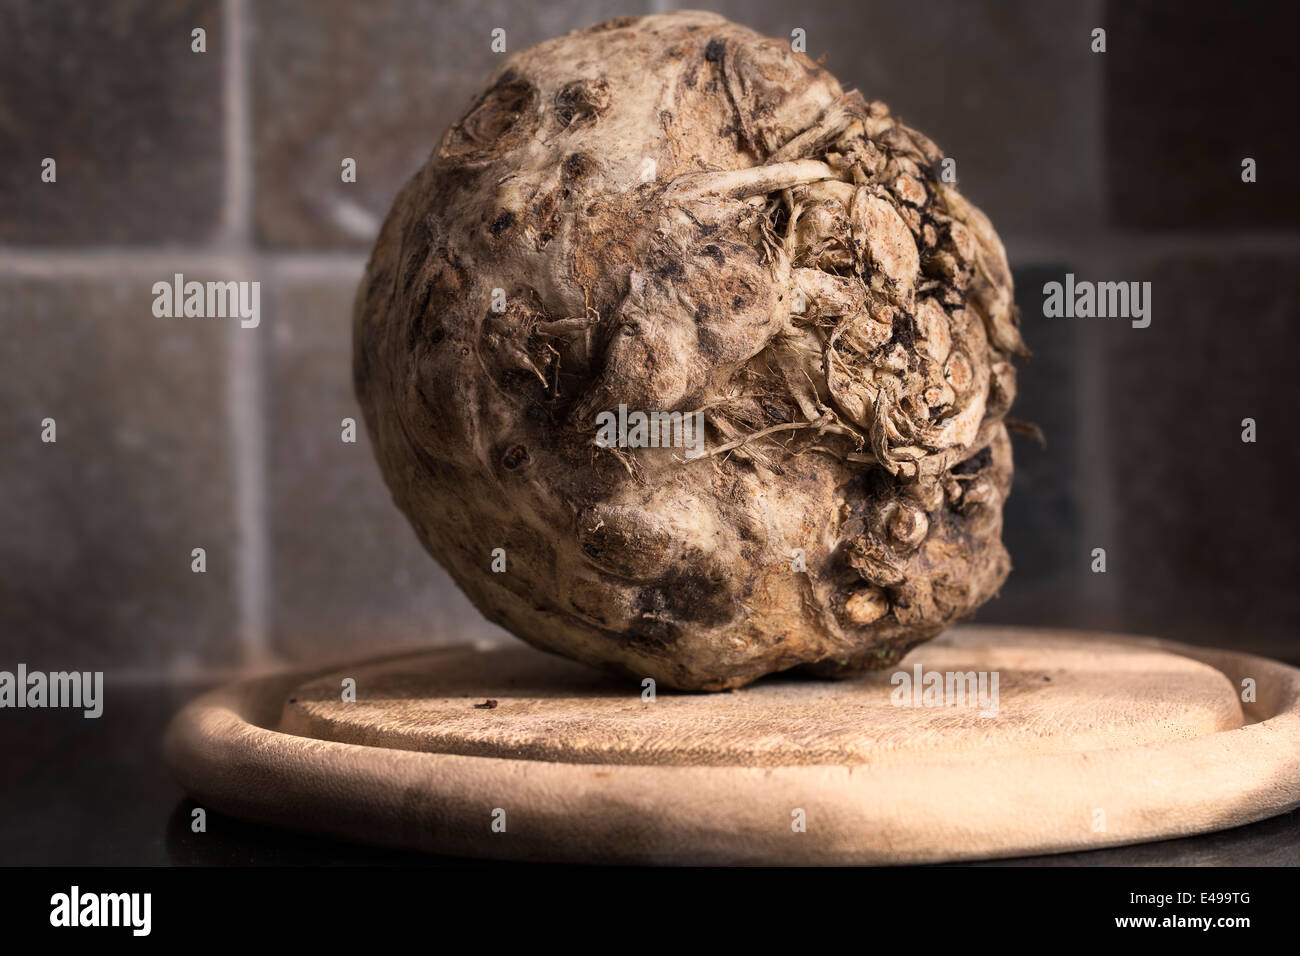 Celeriac, root vegetable recently harvested. Stock Photo